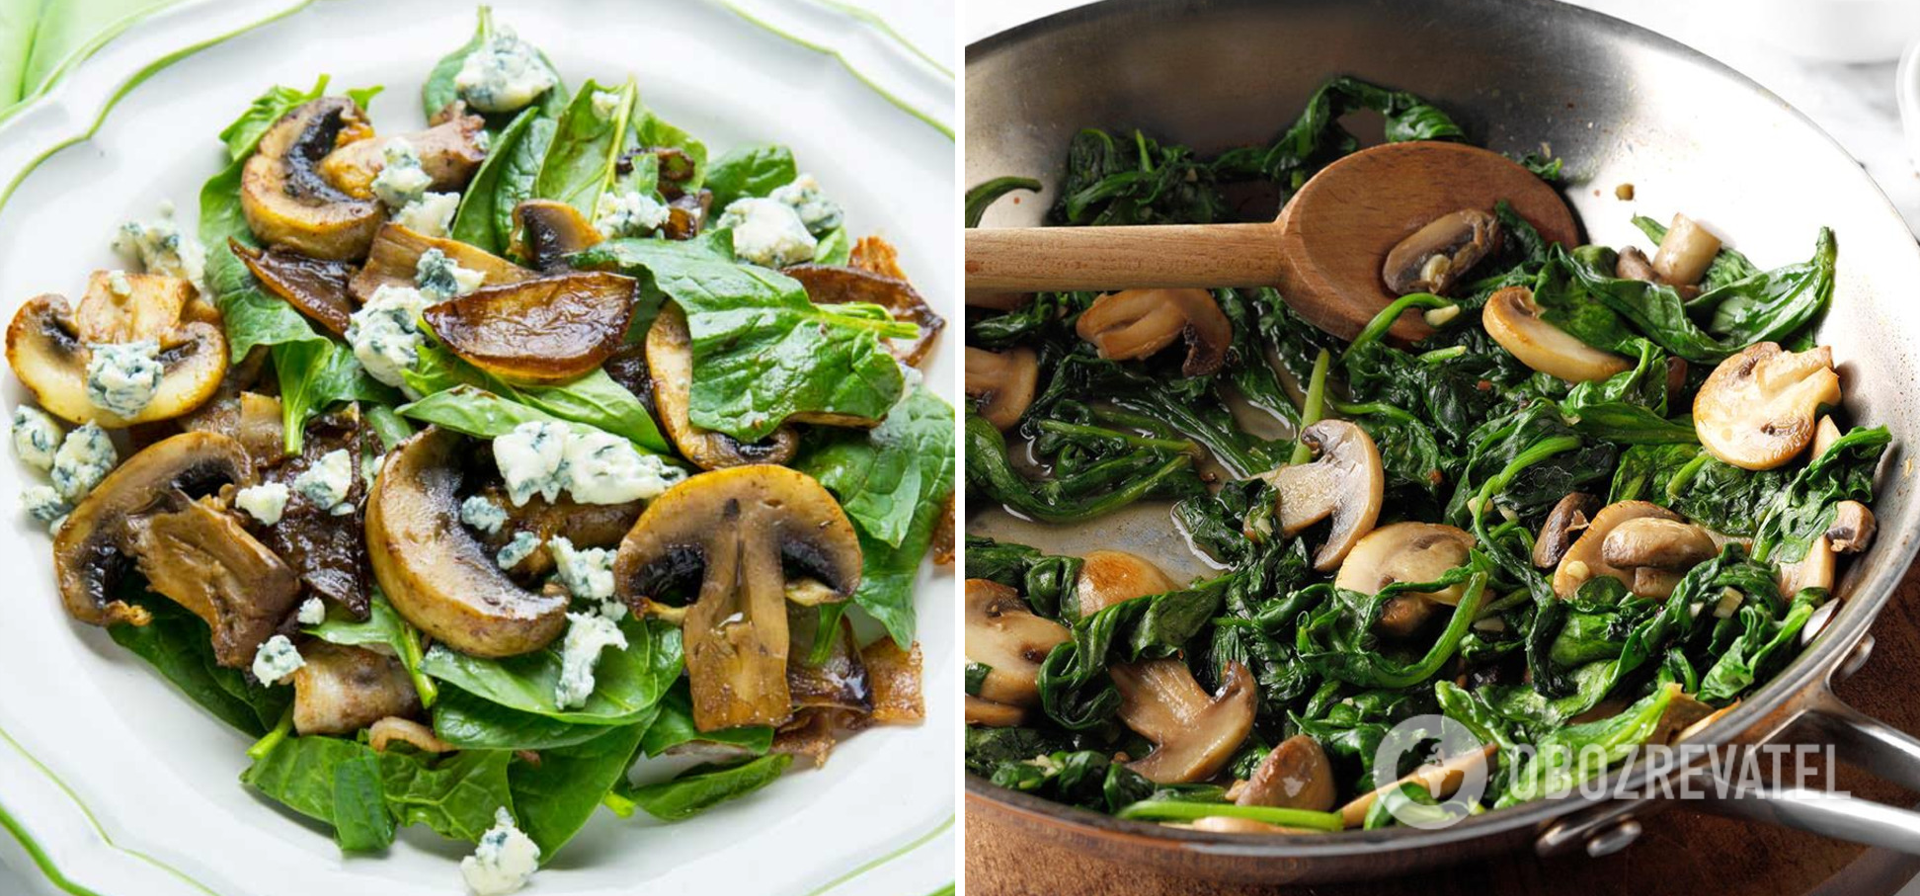 Fried spinach with mushrooms